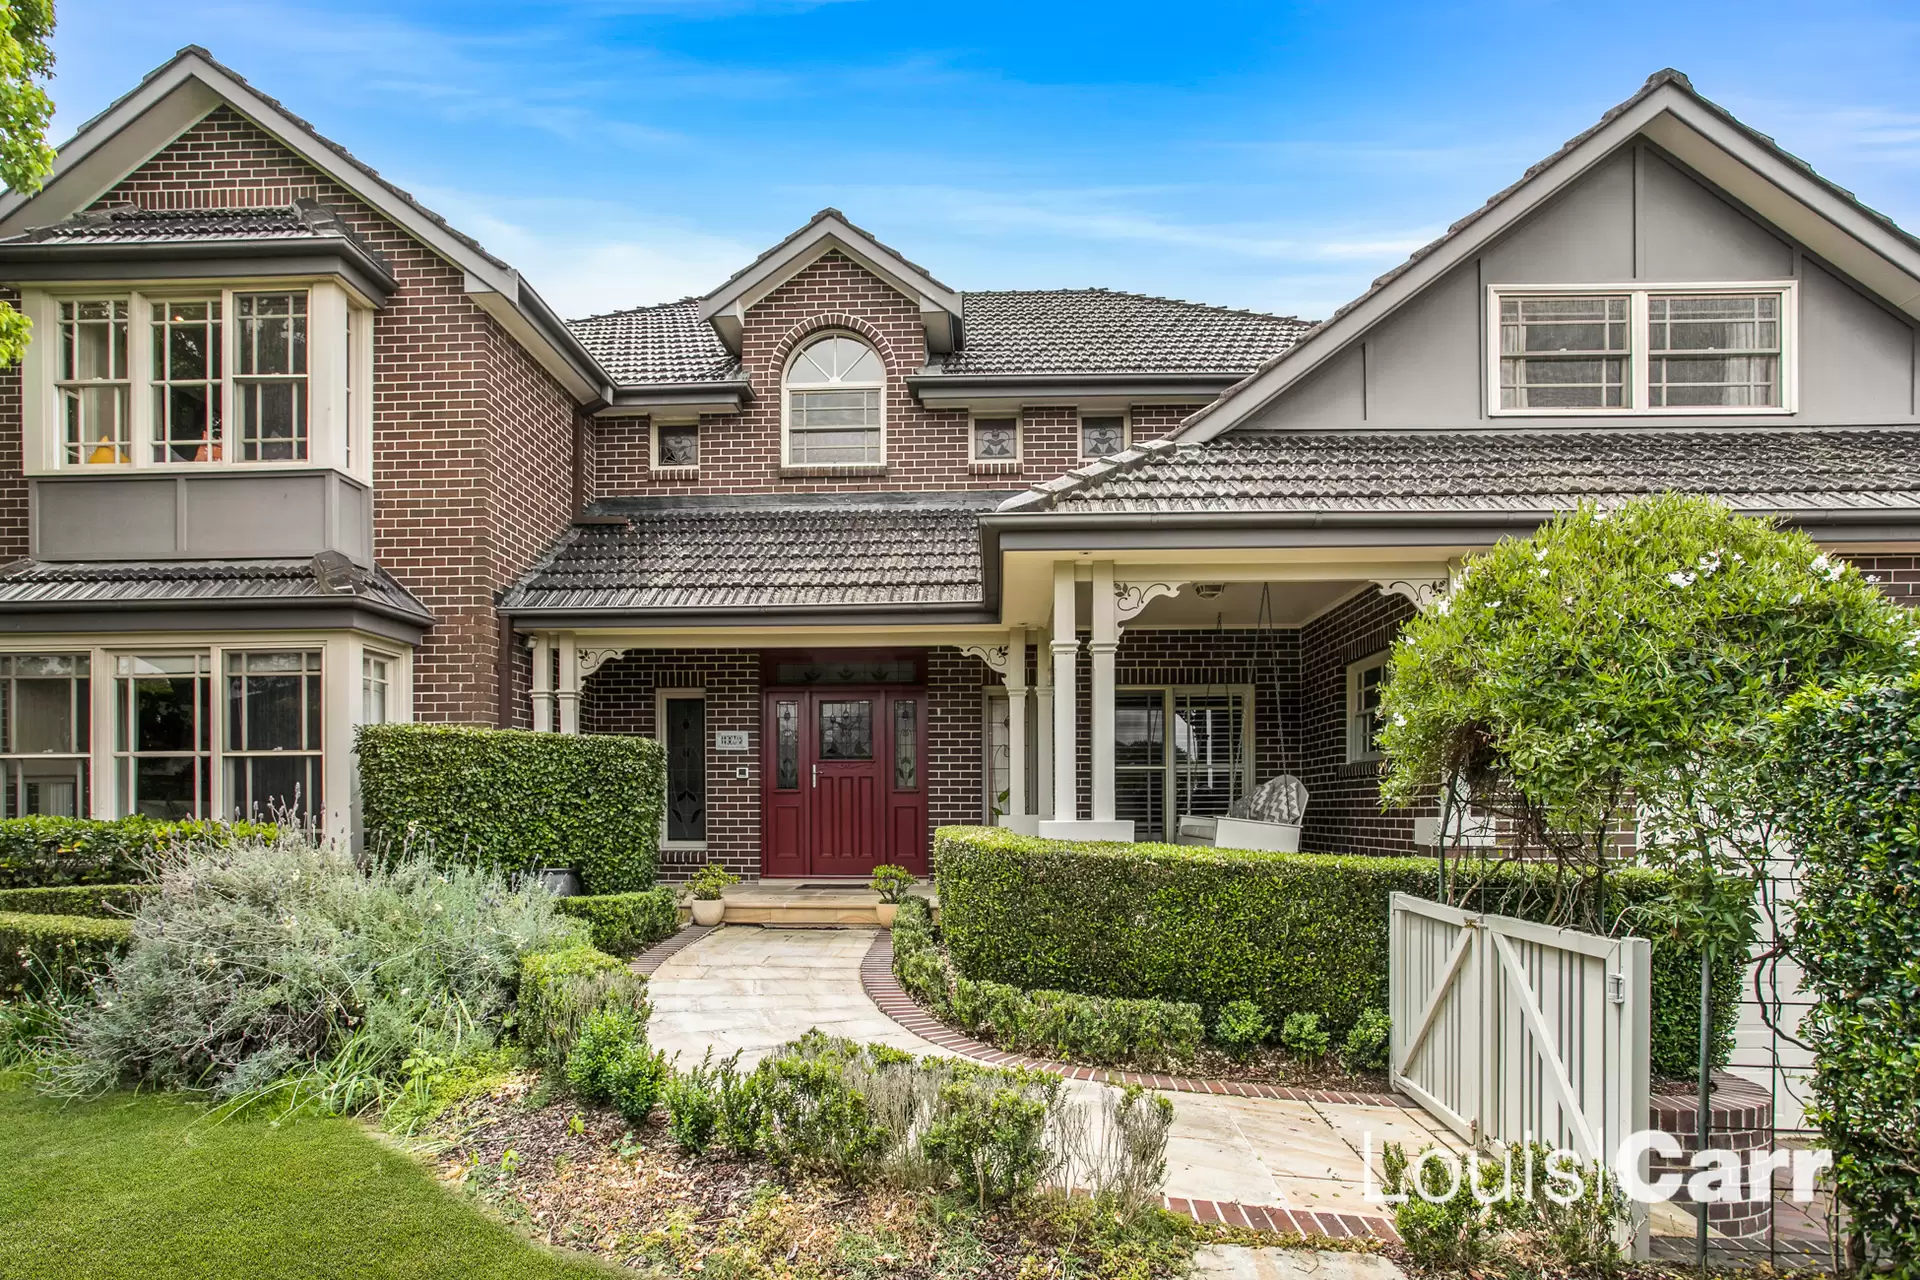 Photo #1: 2 Glenfern Close, West Pennant Hills - Leased by Louis Carr Real Estate